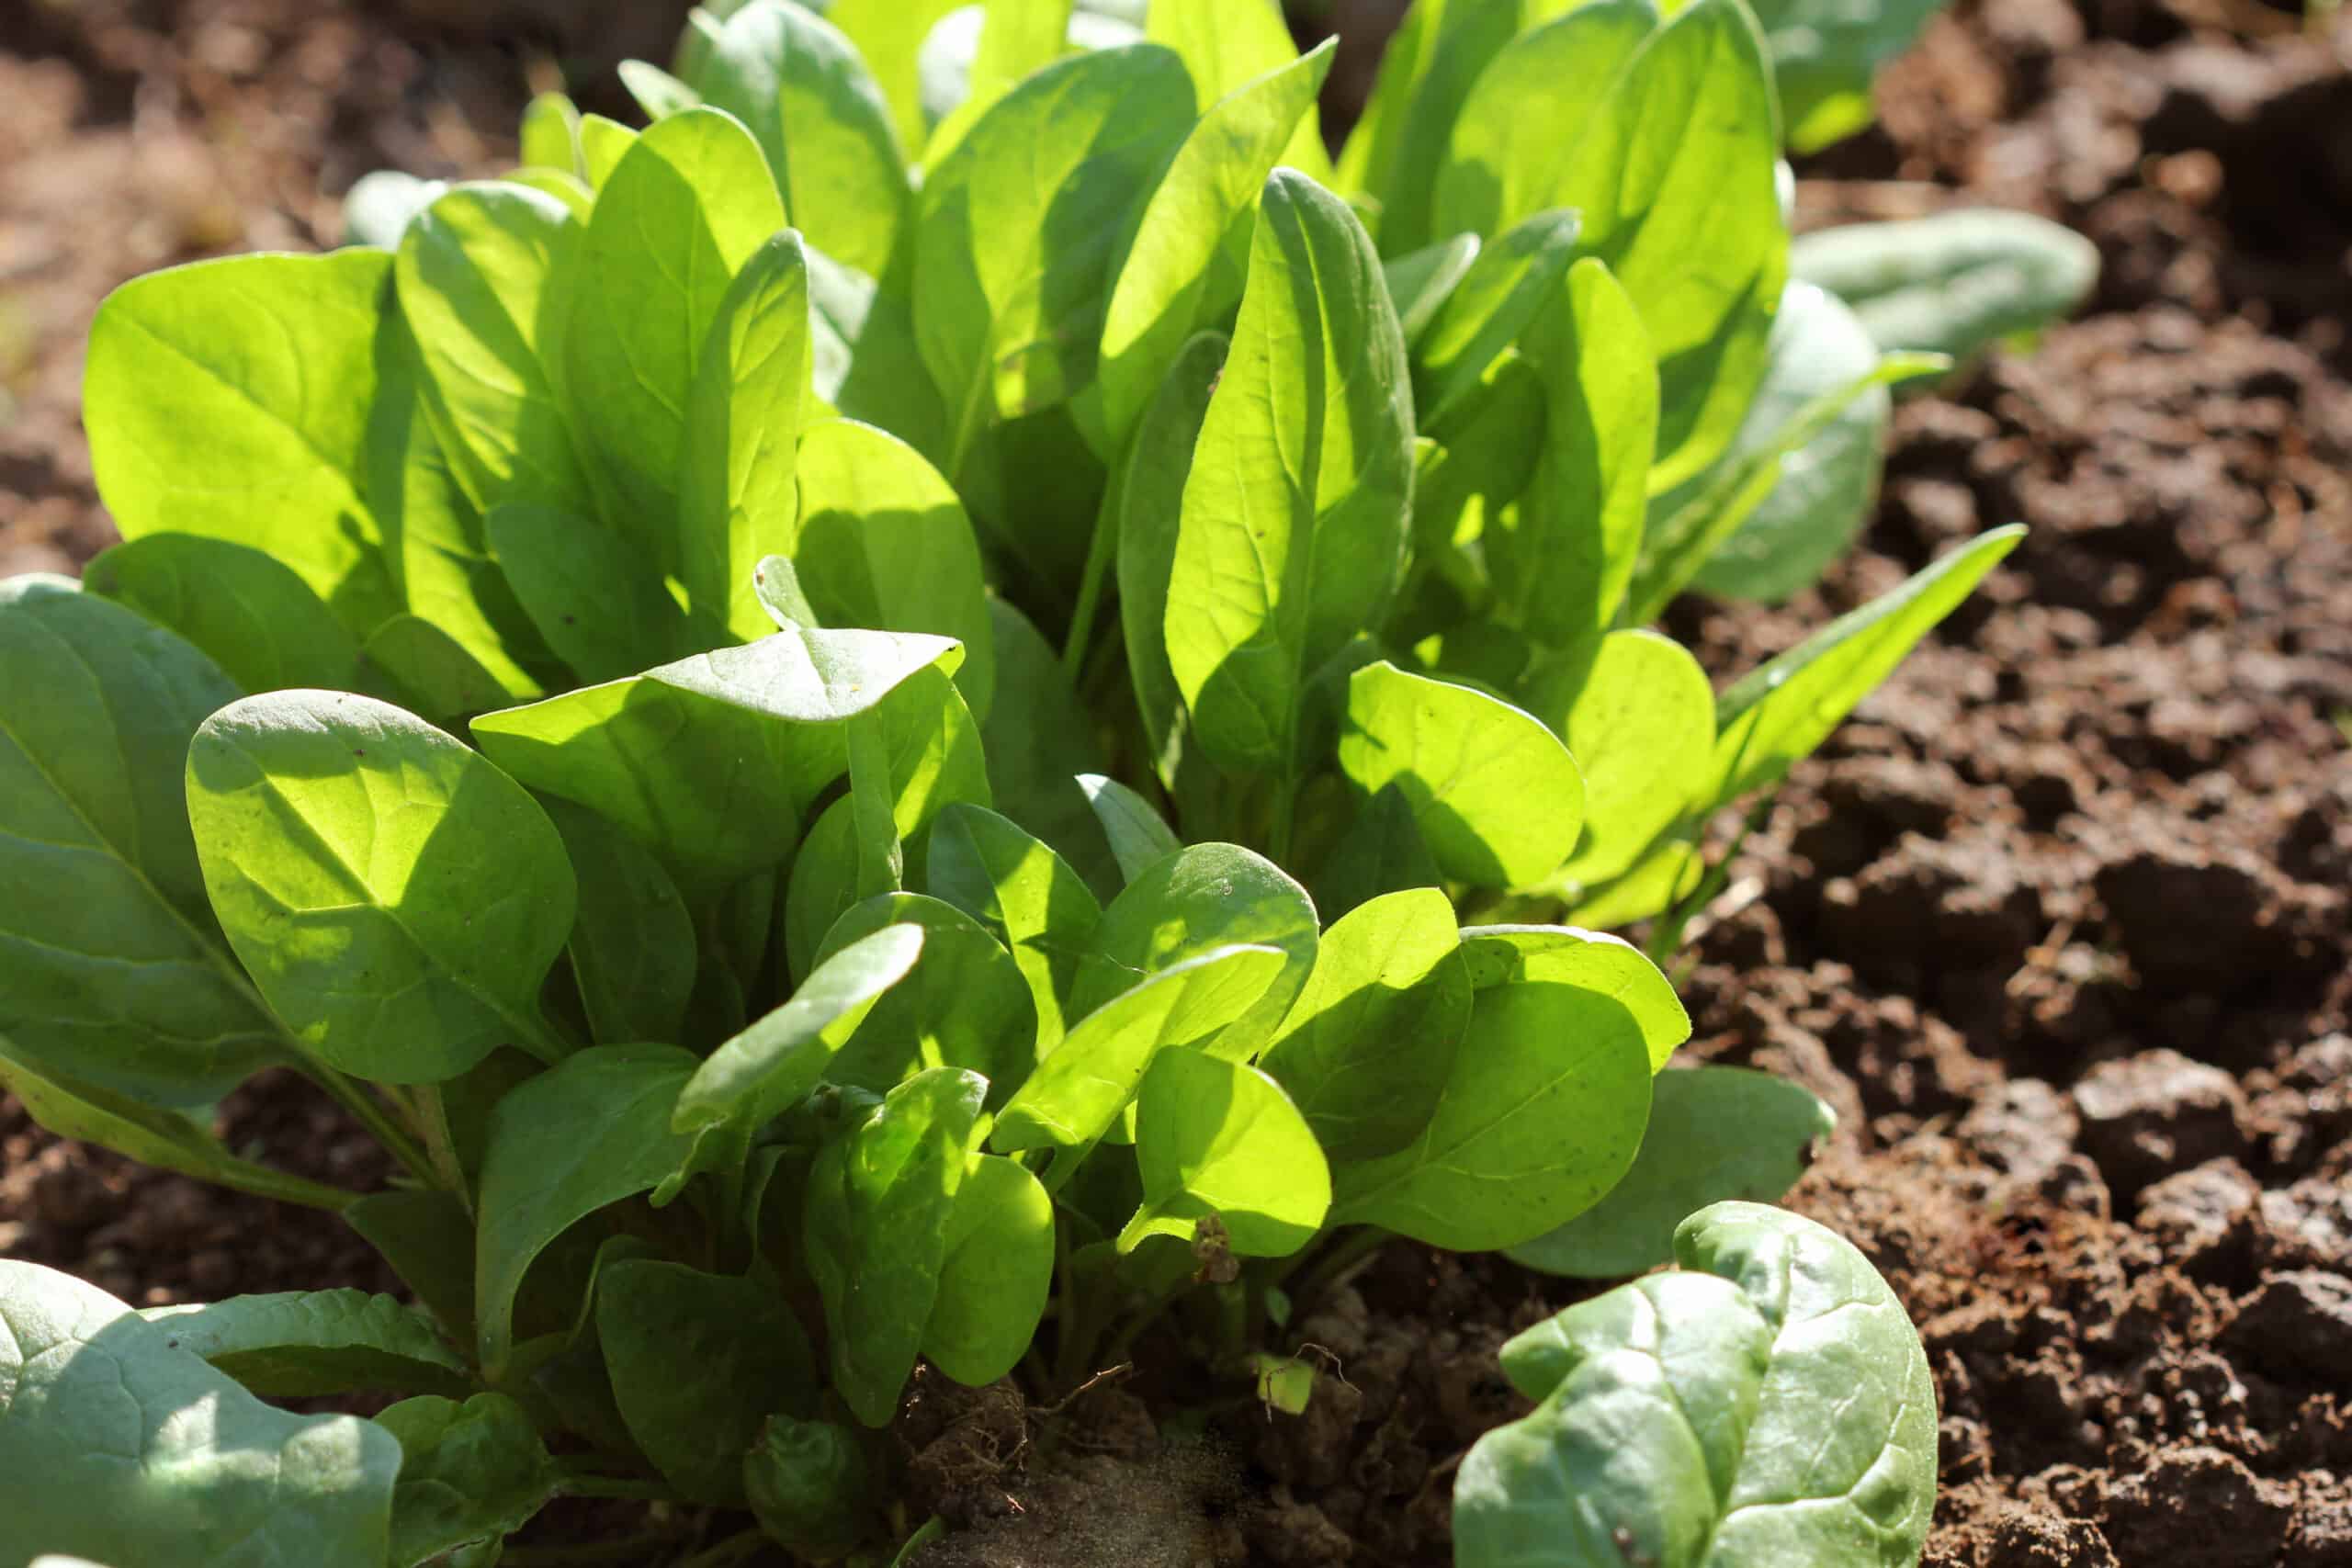 Space spinach plants for even growth